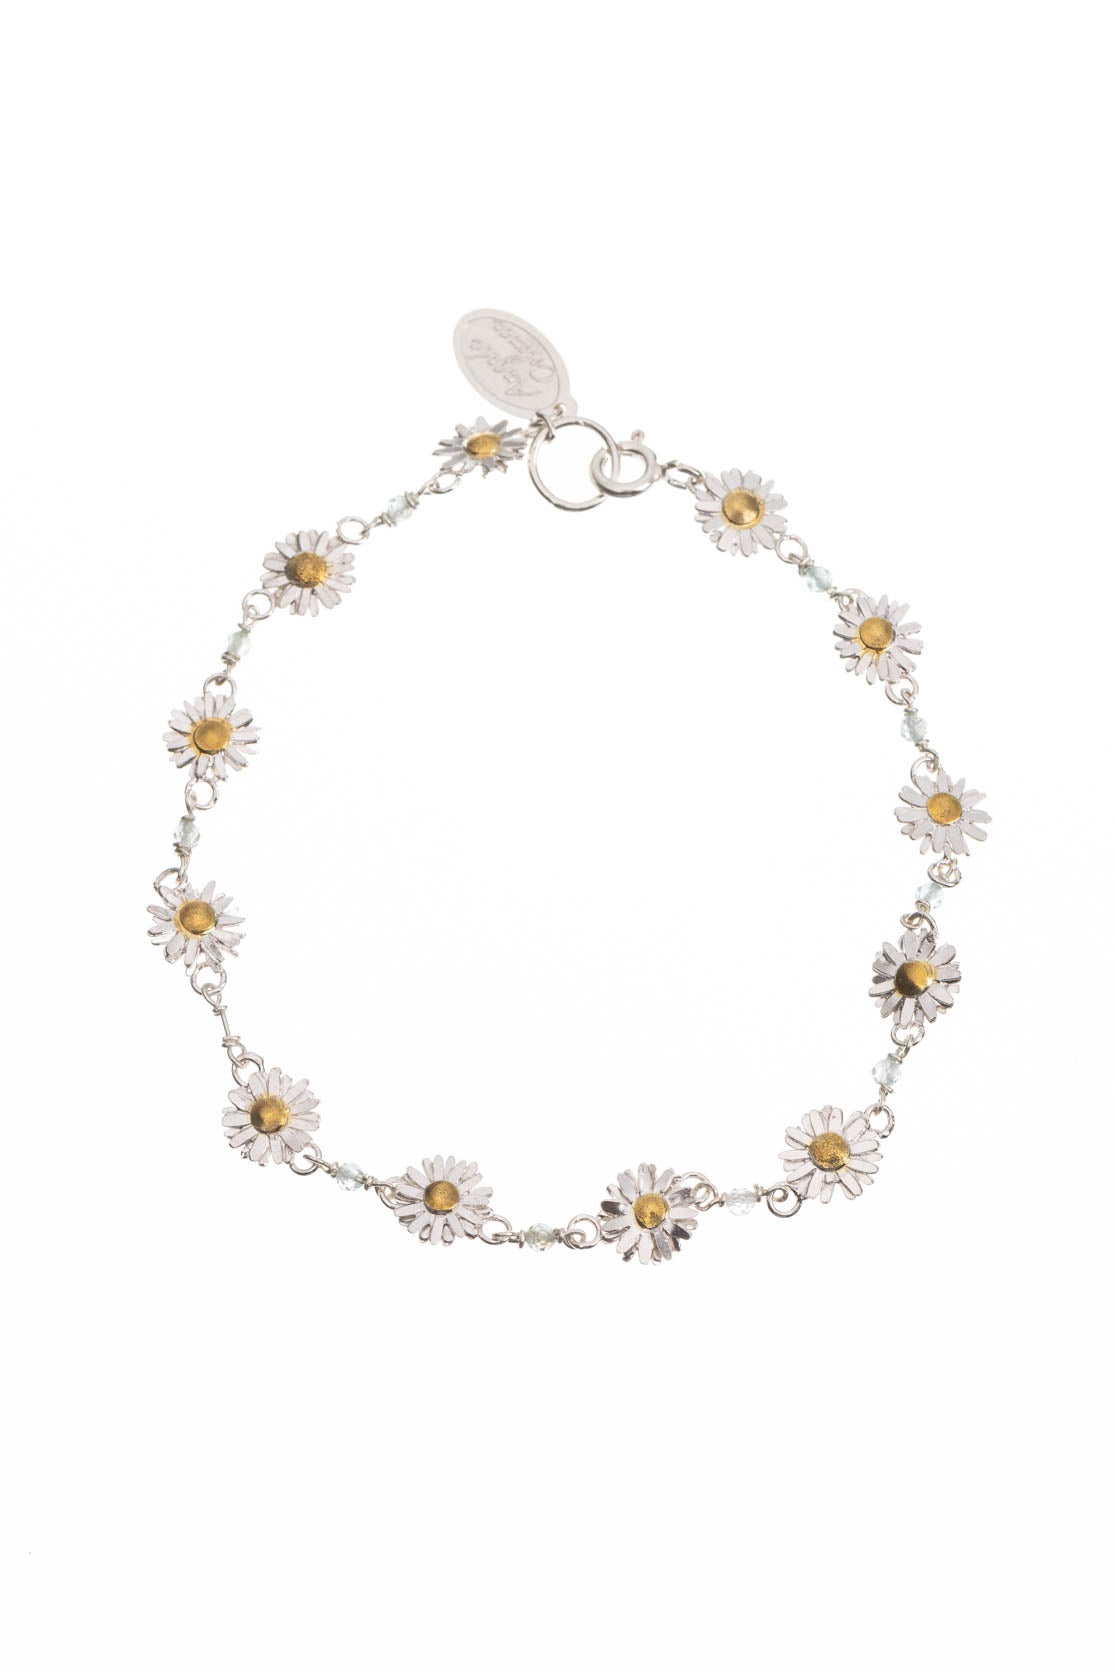 Daisy Chain Bracelet In Sterling Silver With 9ct Gold And Apatite